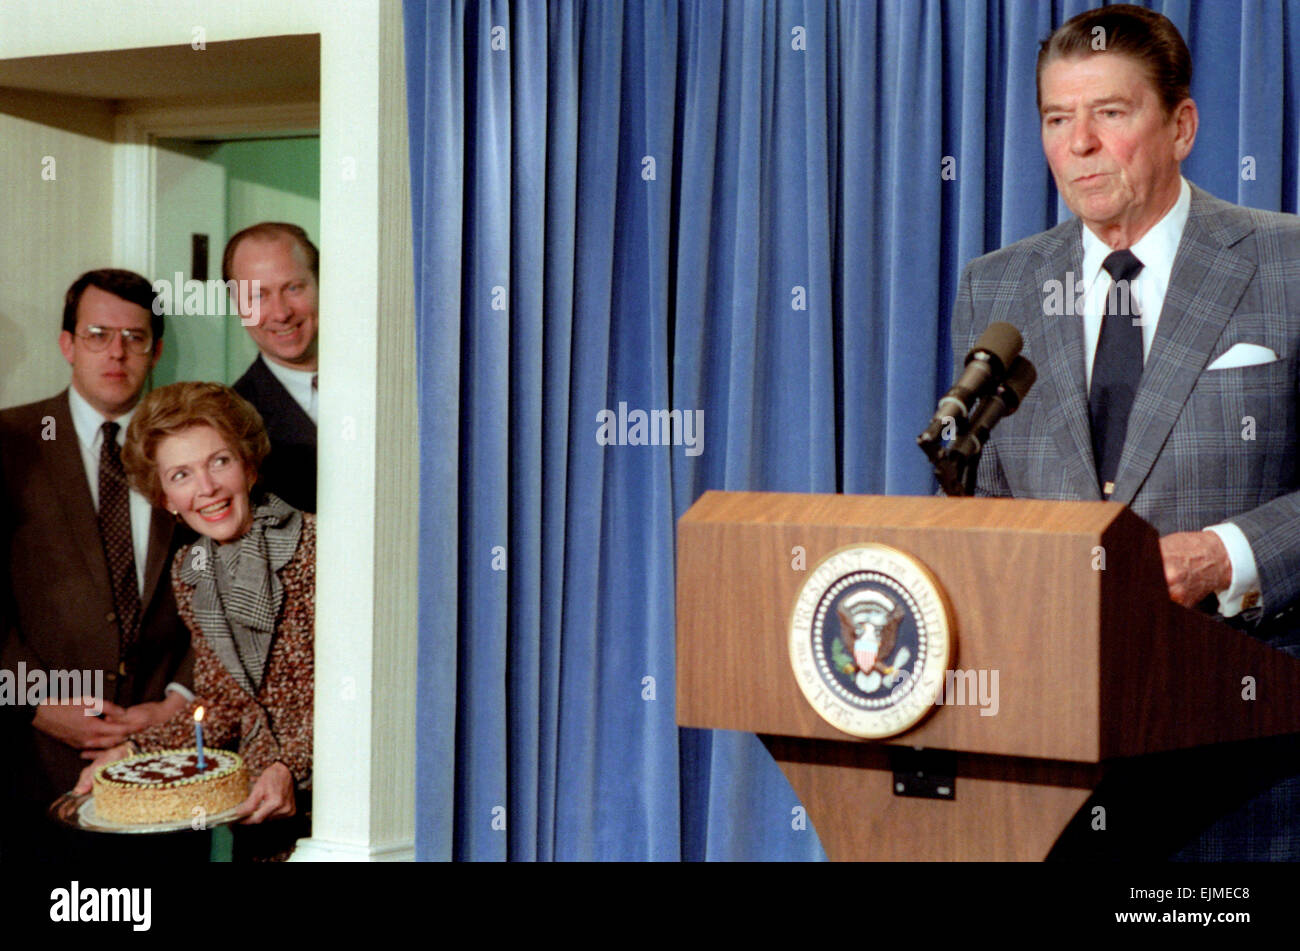 US President Ronald Reagan during a press conference in the Briefing Room of the White House as First Lady Nancy Reagan and David Gergen prepare a surprise Birthday Party in honor of President 71st birthday February 4, 1983 in Washington, DC. Stock Photo